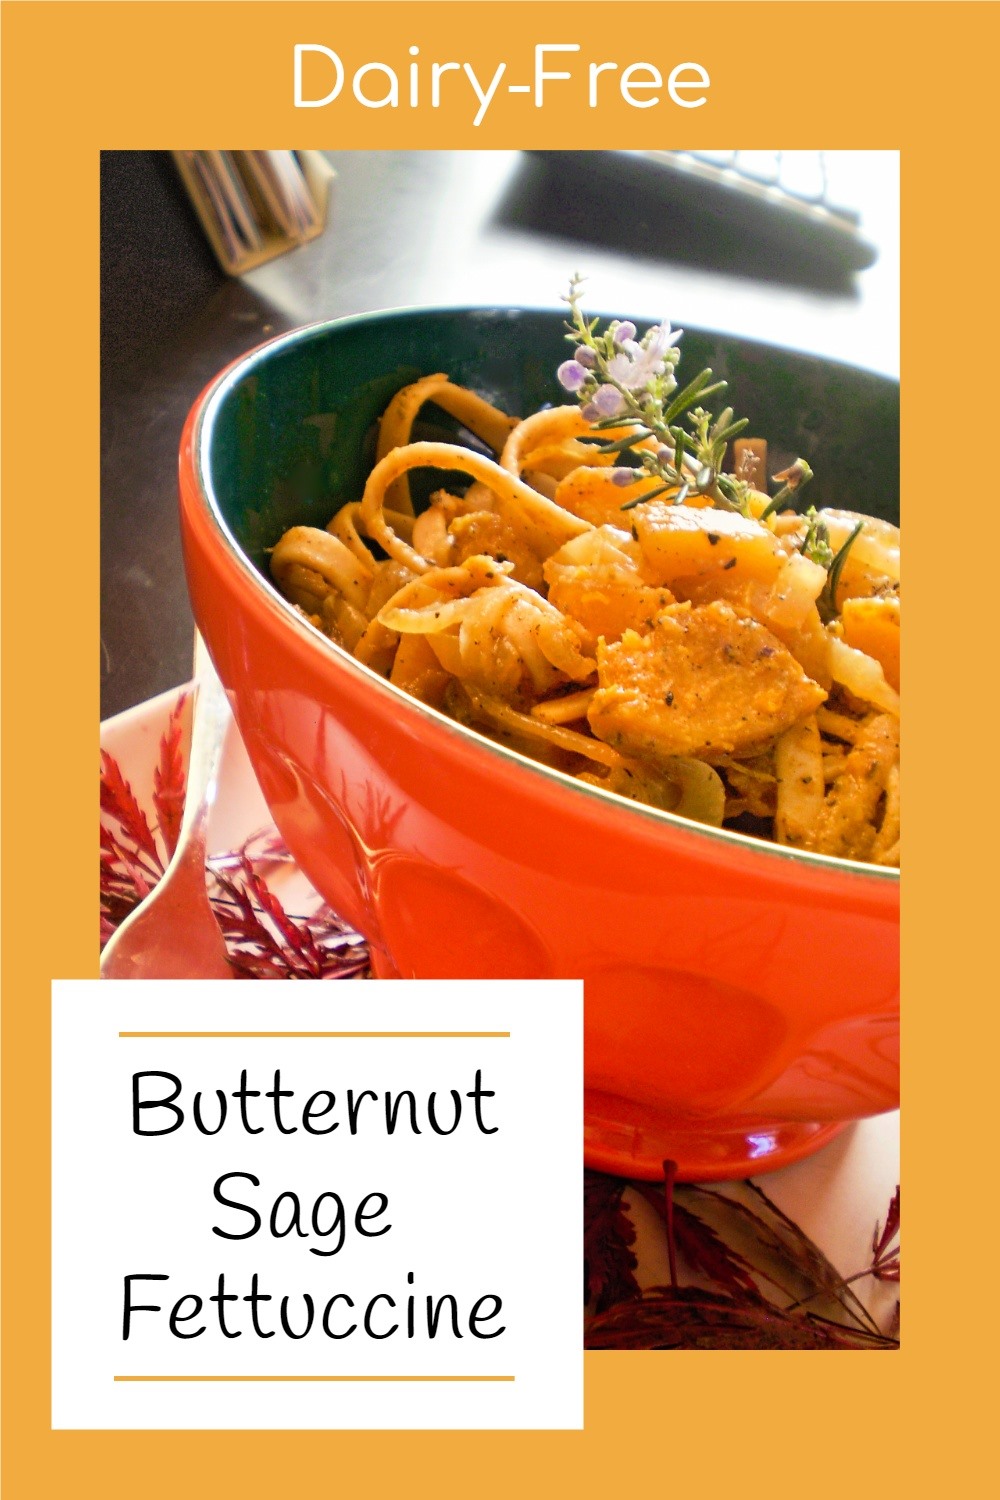 Vegan Butternut Sage Fettuccine - dairy-free, nut-free, soy-free, optionally gluten-free, plant-based, easy, and delicious!